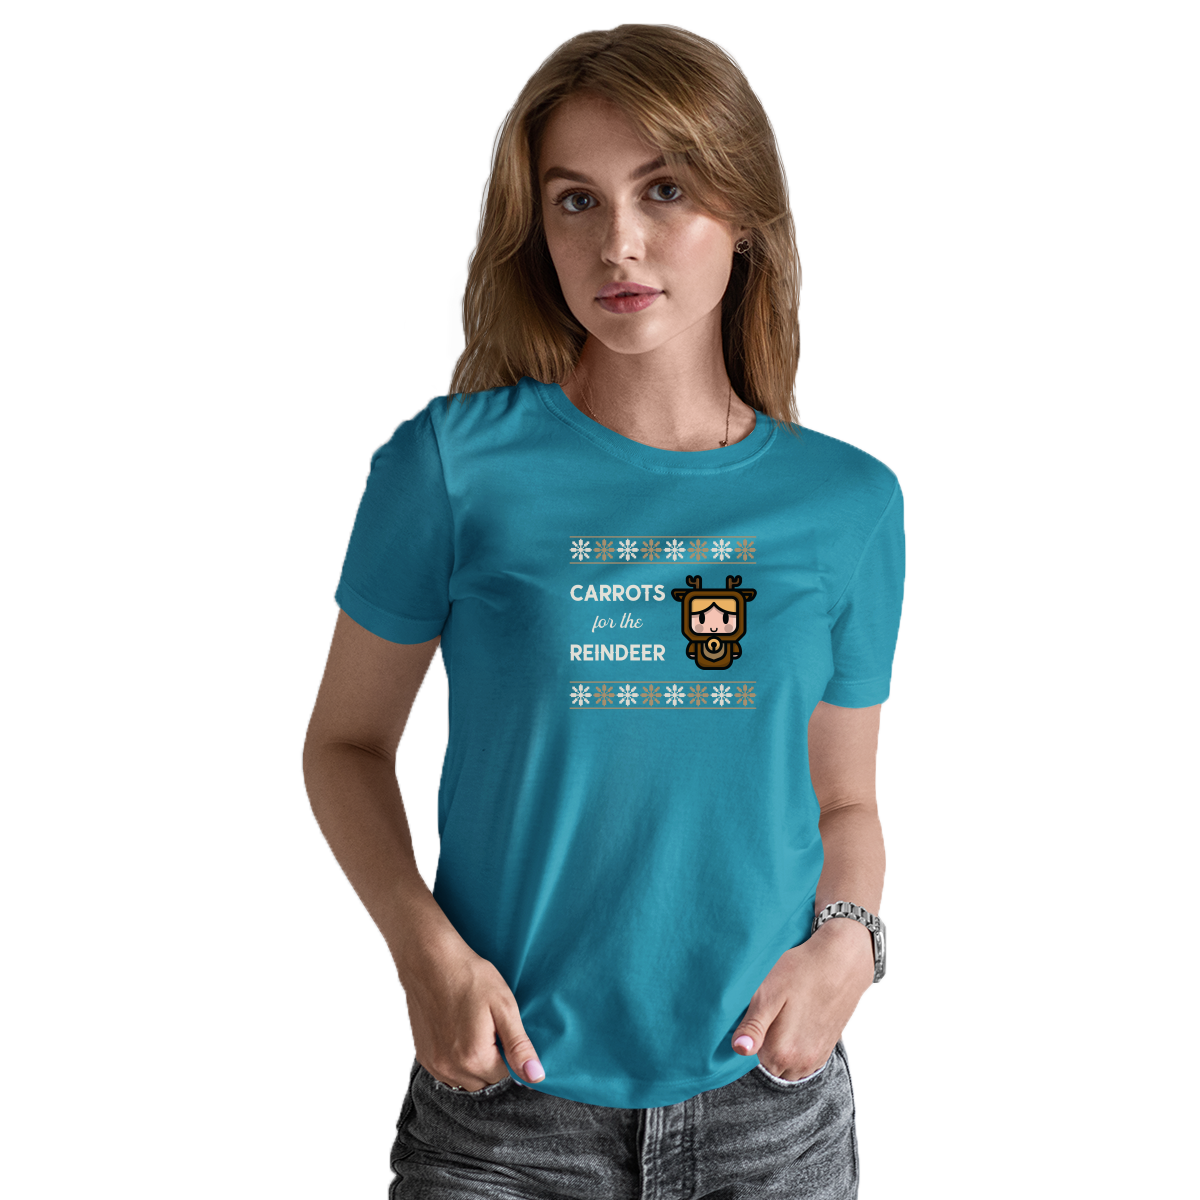 Carrots for the Reindeer Women's T-shirt | Turquoise